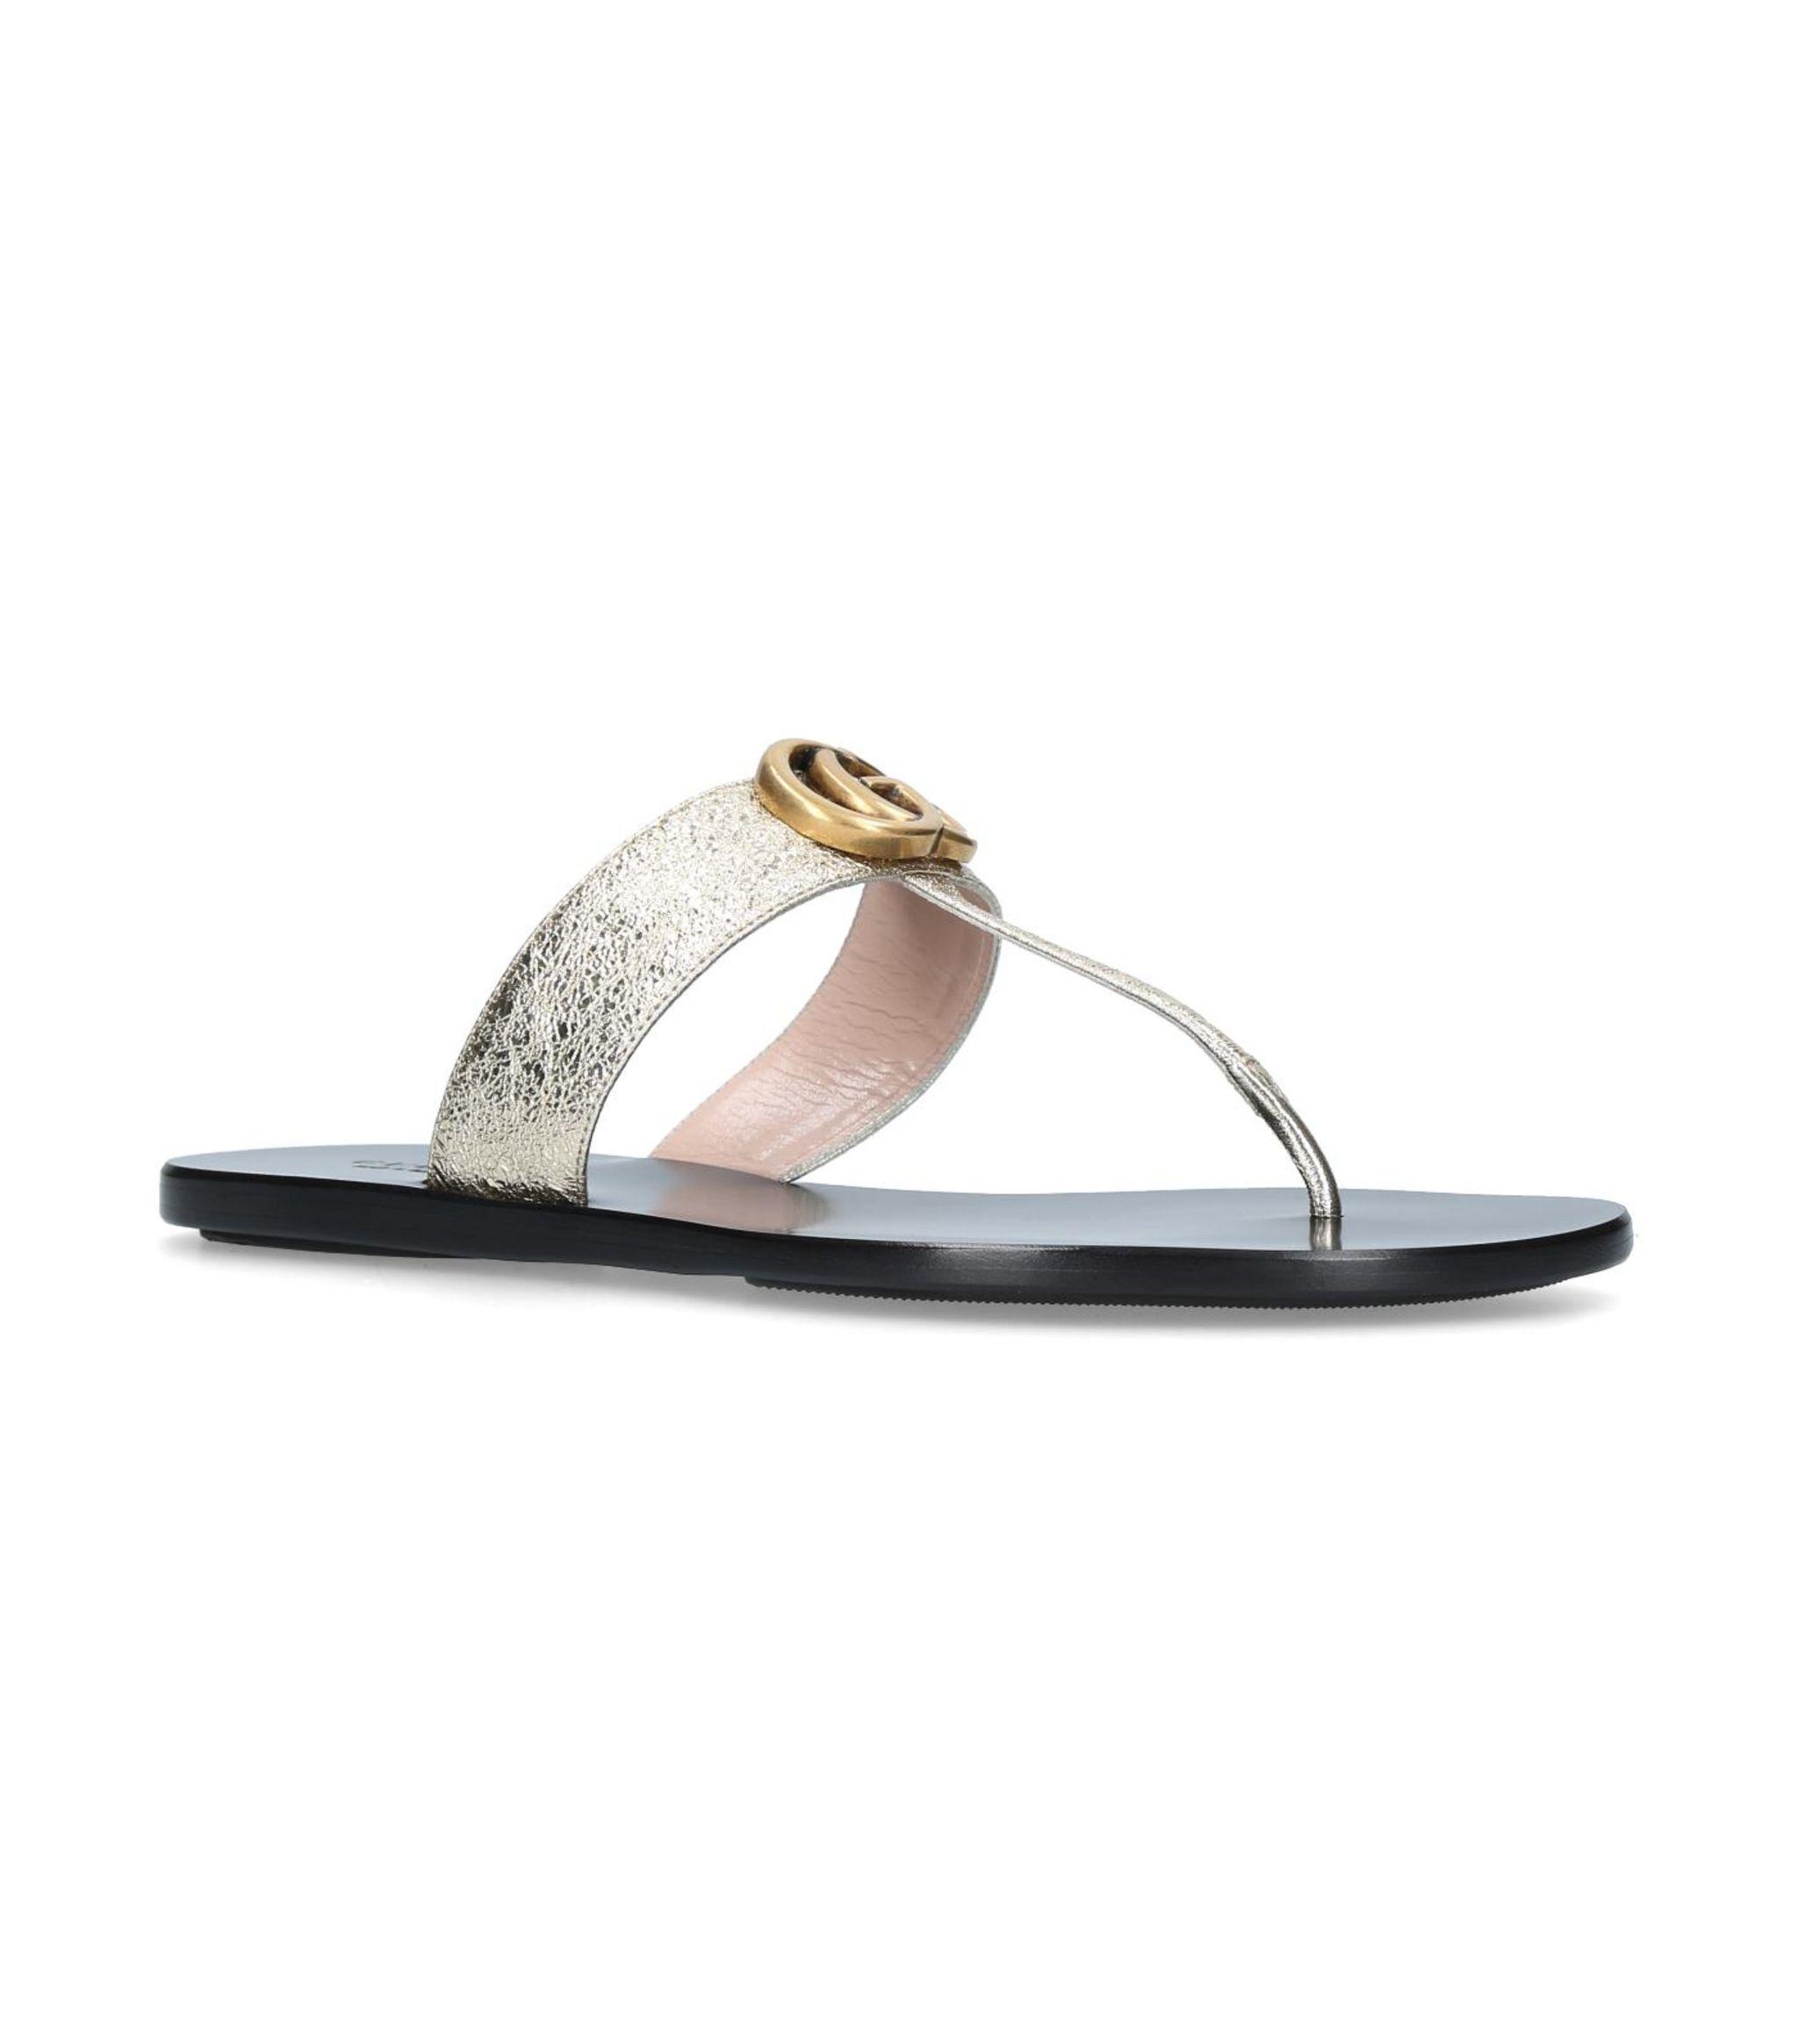 Gucci Leather Marmont Sandals in White - Lyst